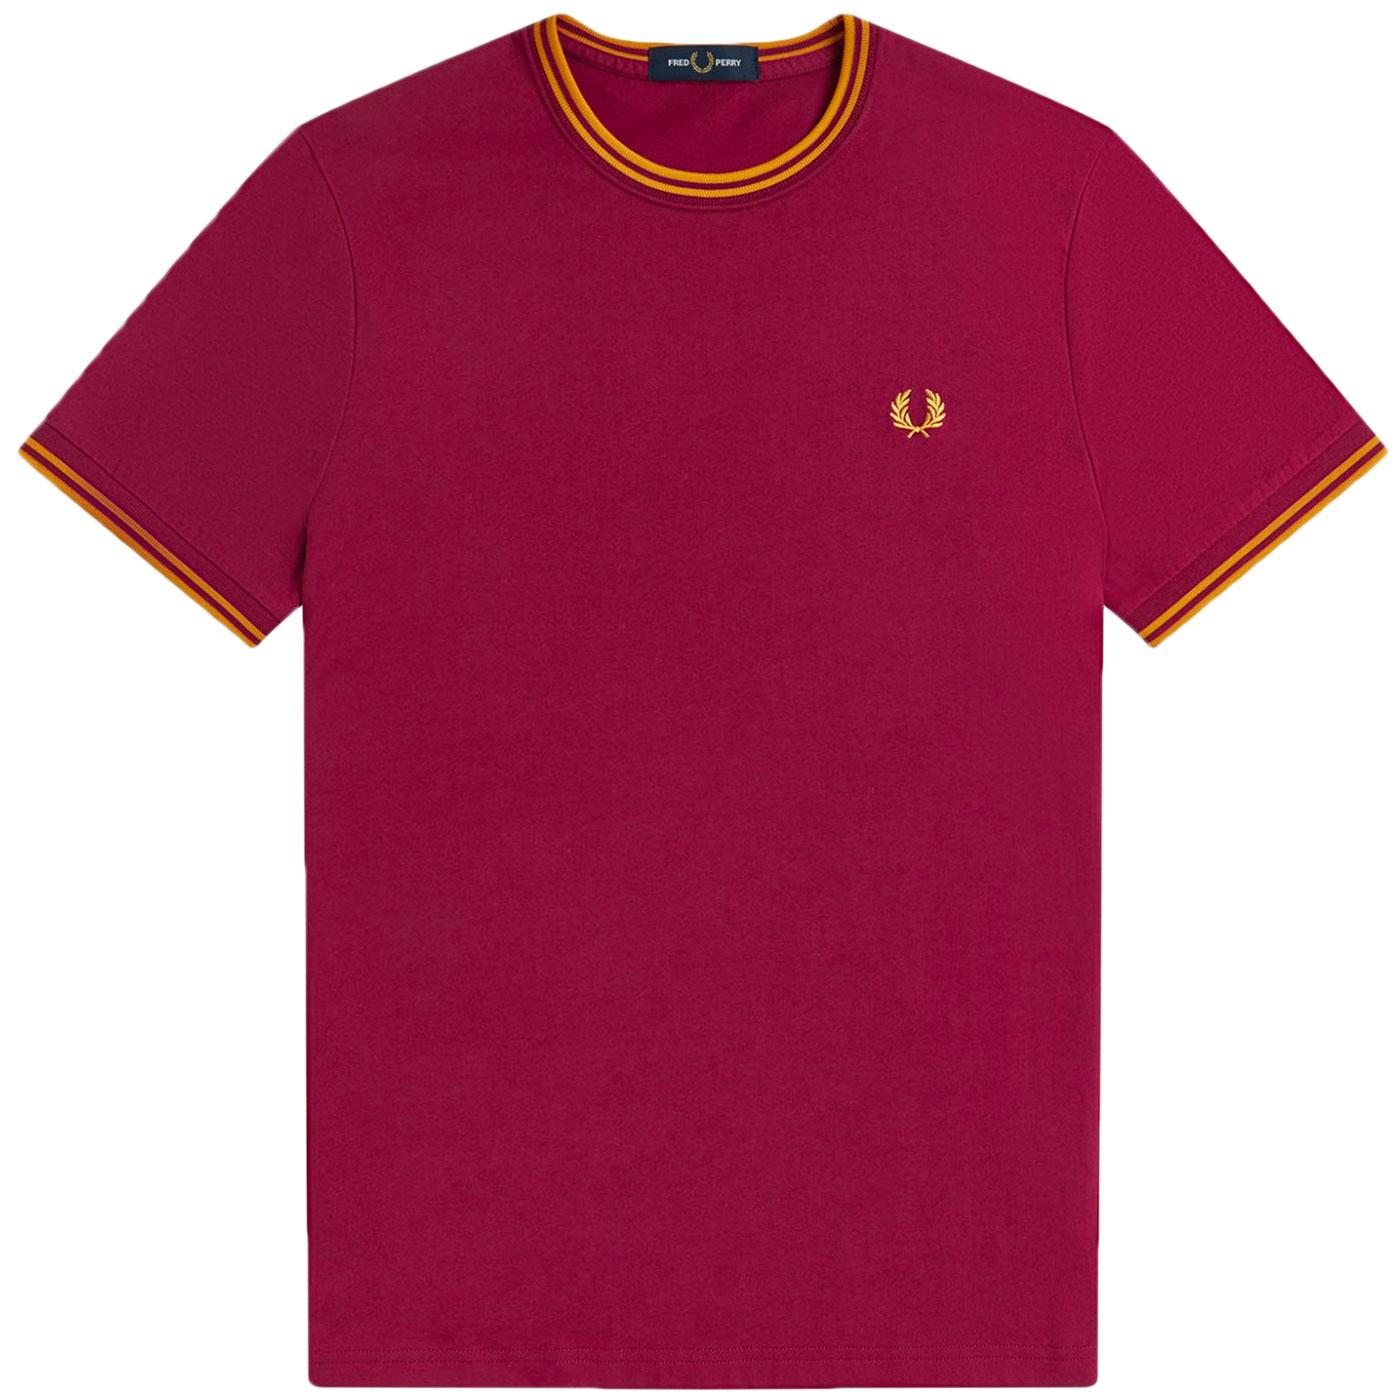 FRED PERRY M1588 Men's Retro Twin Tipped Tee Tawny Port